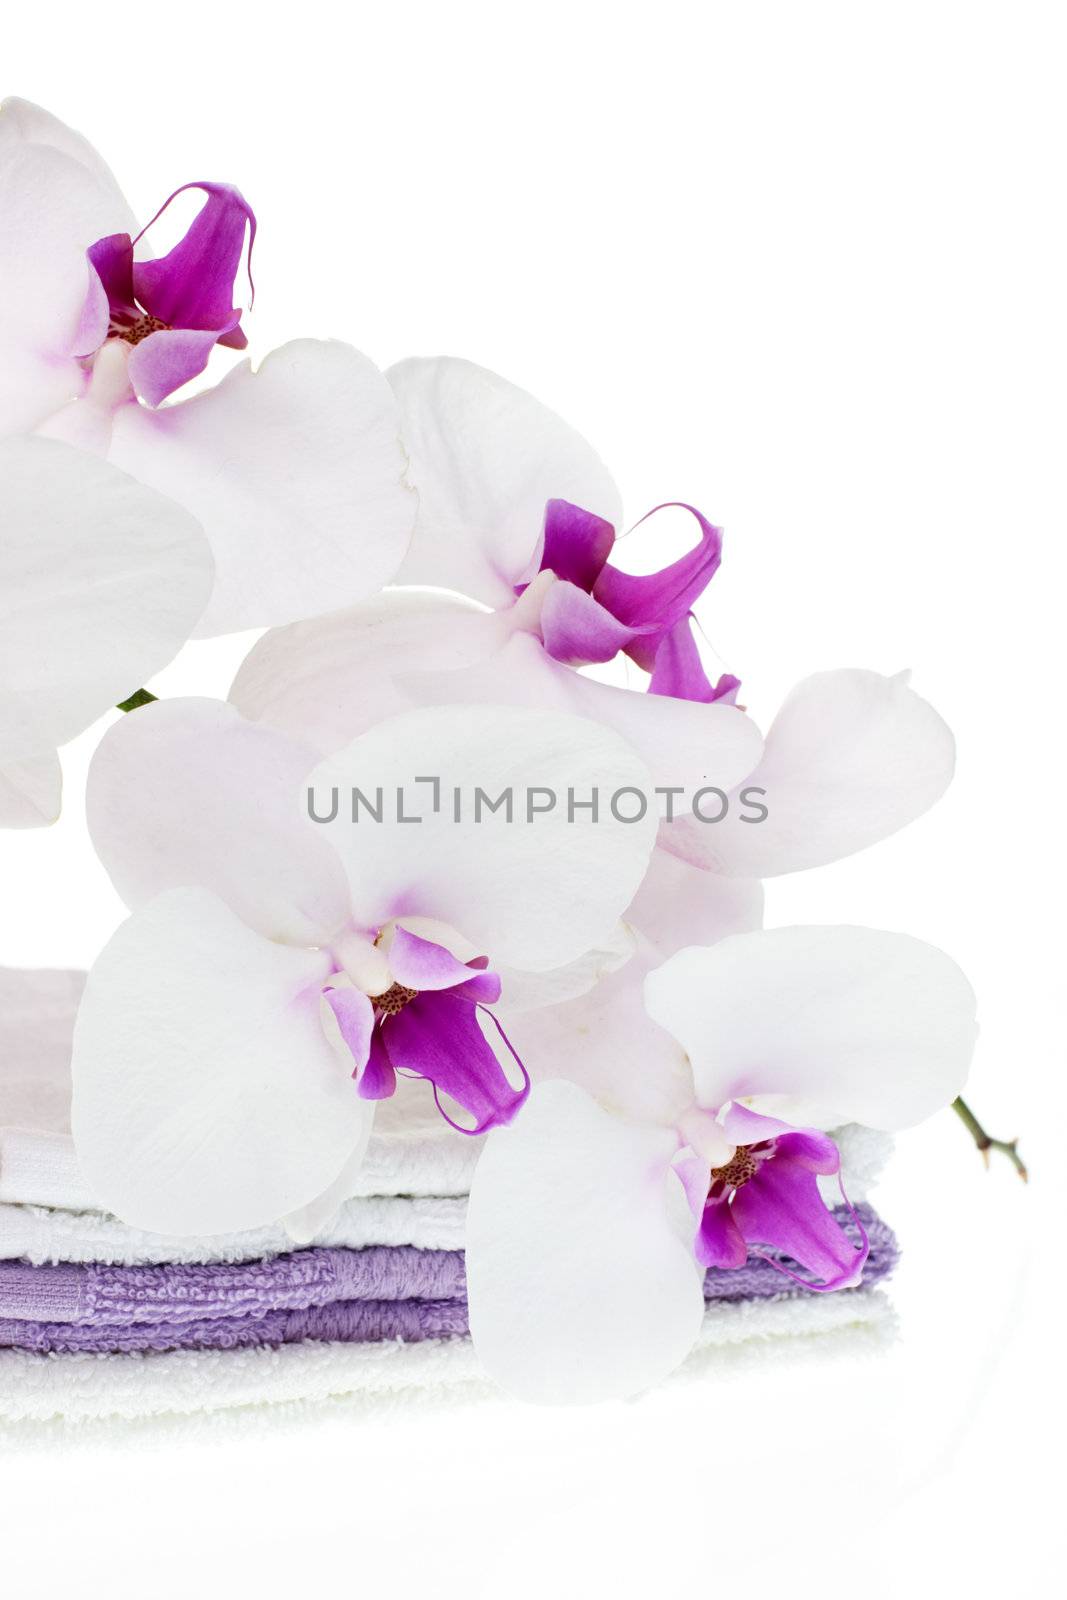 Spa set with white orchid and towels on white background